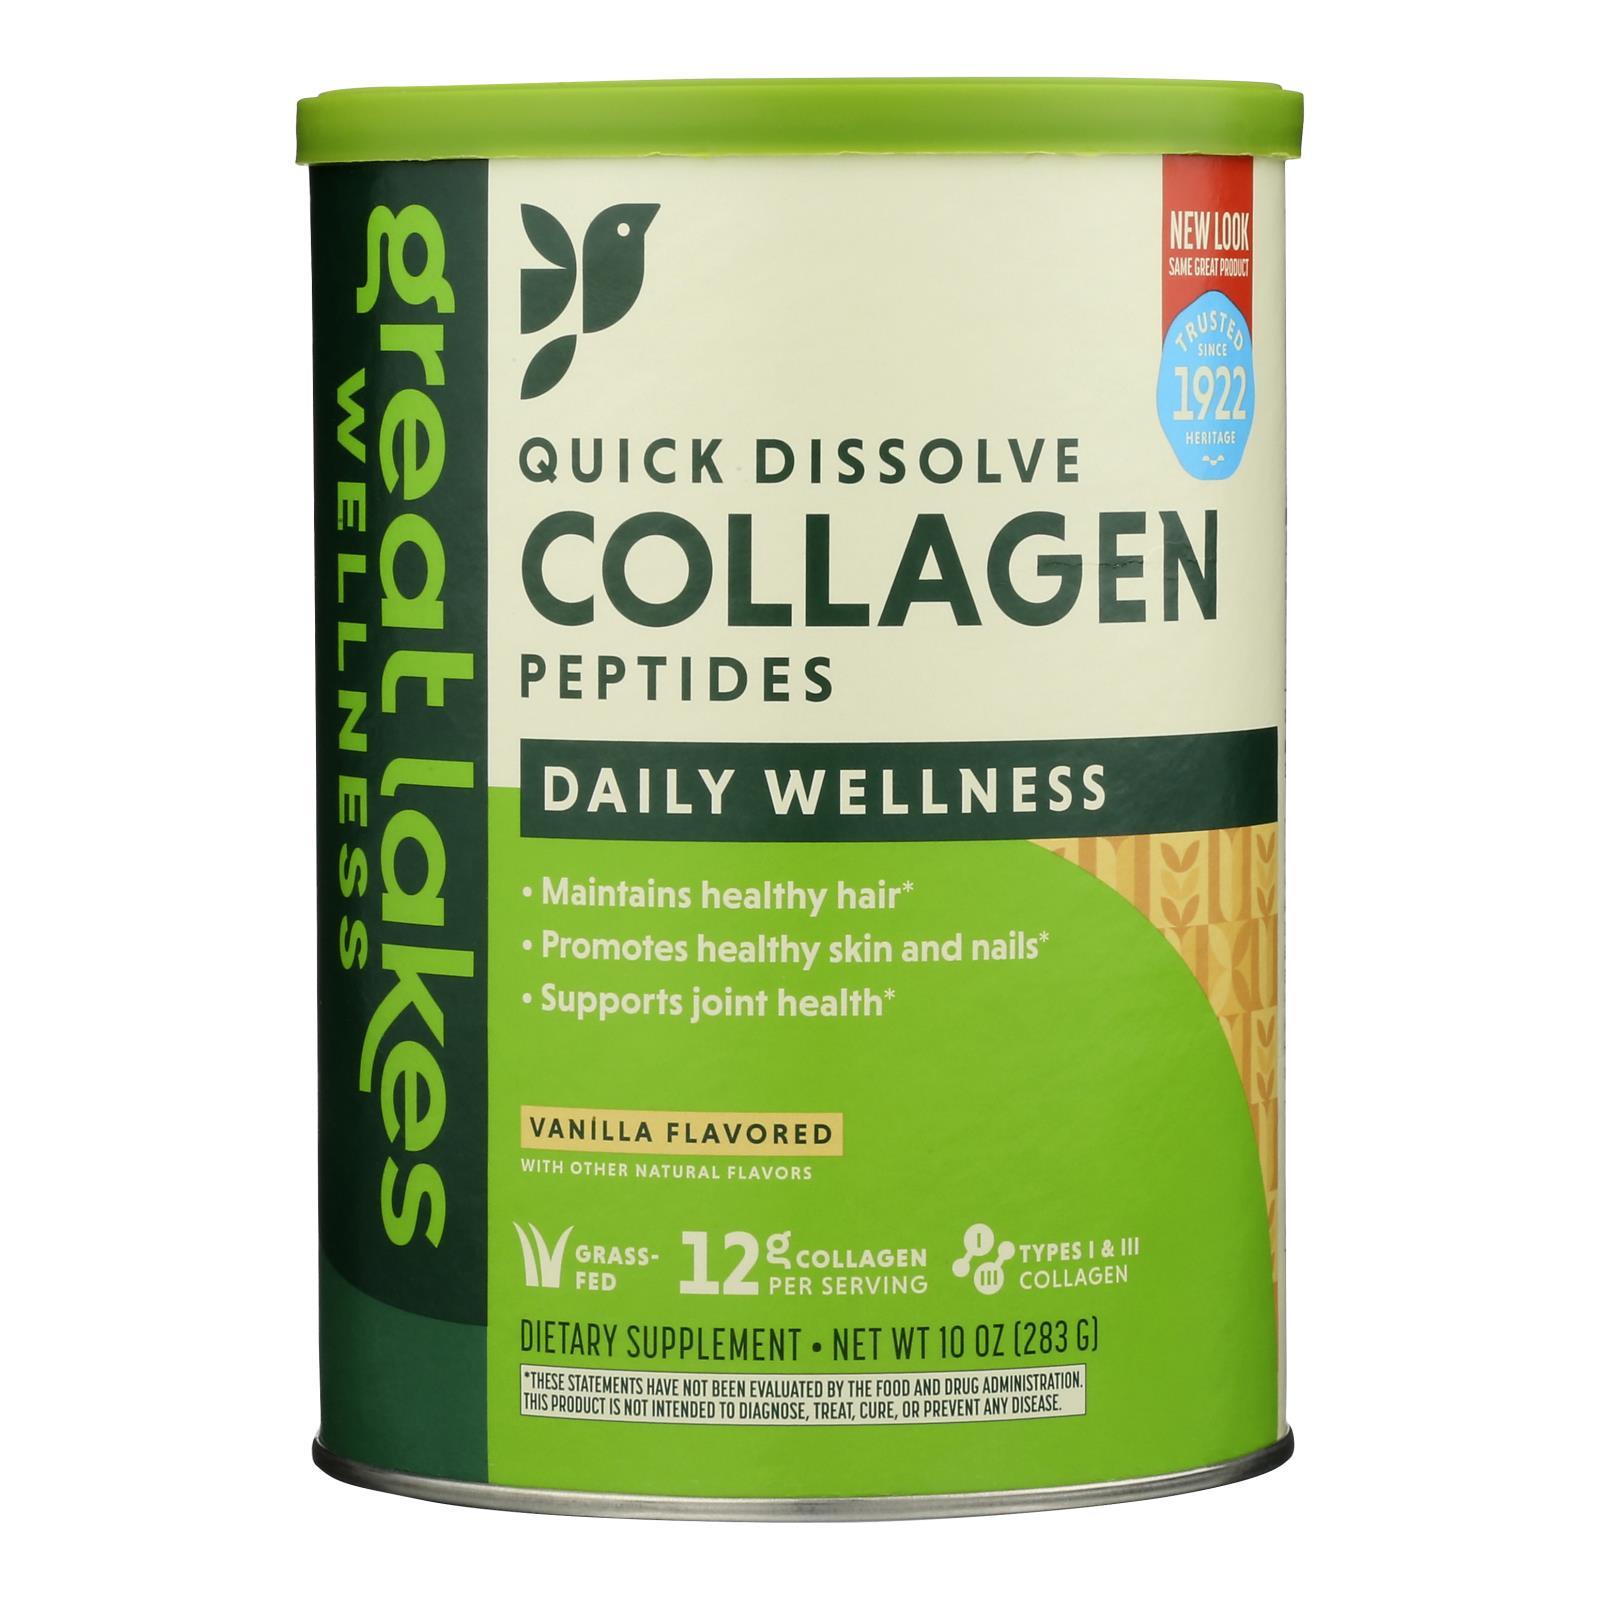 Image showing the Great Lakes Wellness - Collagen Peptides Vanilla Product